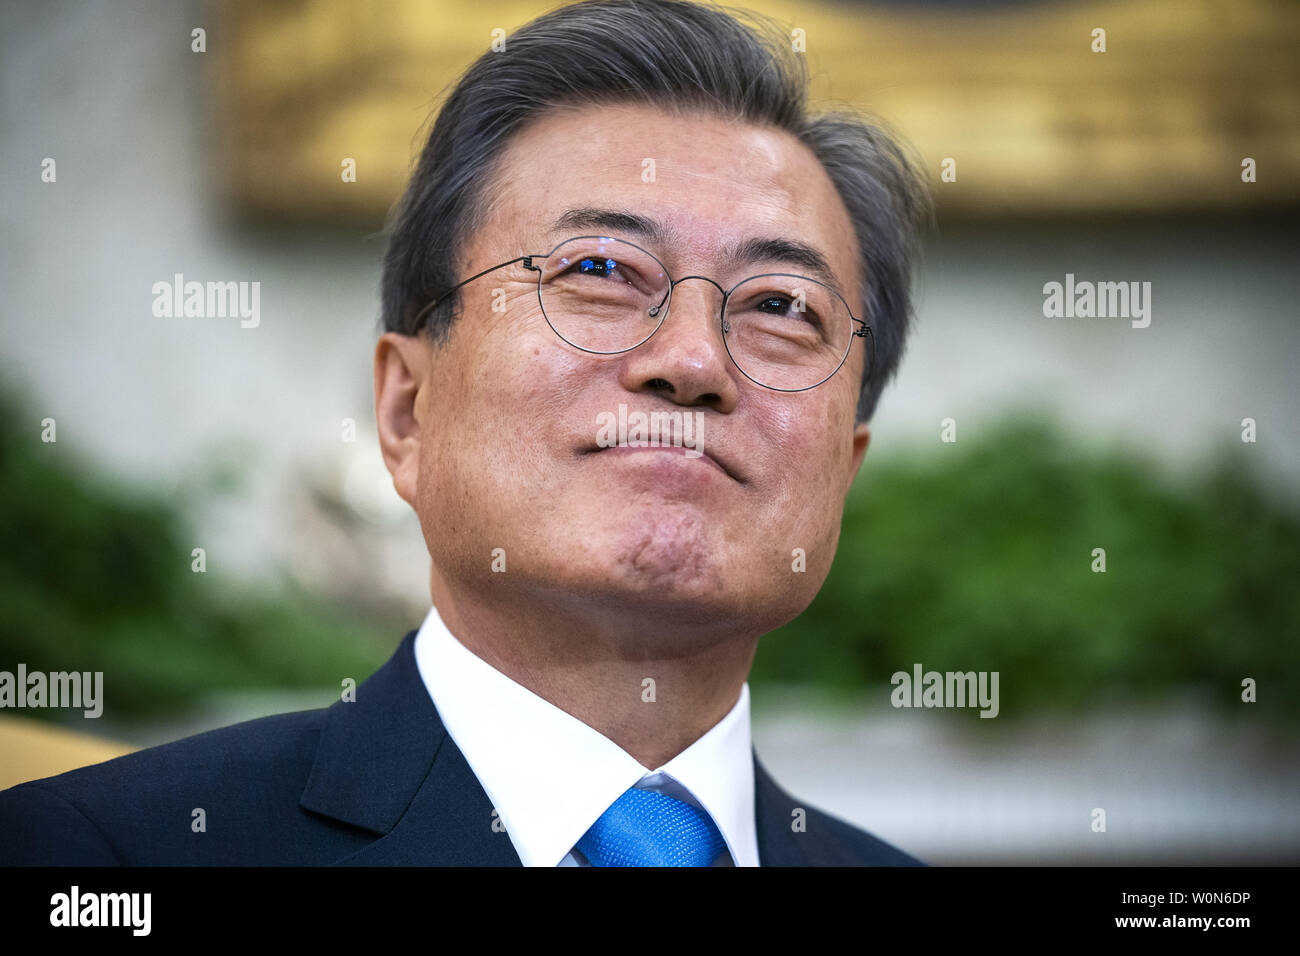 South Korean President Moon Jae-in listens to US President Donald J. Trump (not pictured) speak in the Oval Office of the White House White House in Washington on April 11, 2019. President Moon is expected to ask President Trump to reduce sanctions on North Korea in an attempt to jump start nuclear negotiations between North Korea and the US.  Photo by Jim Lo Scalzo/UPI Stock Photo